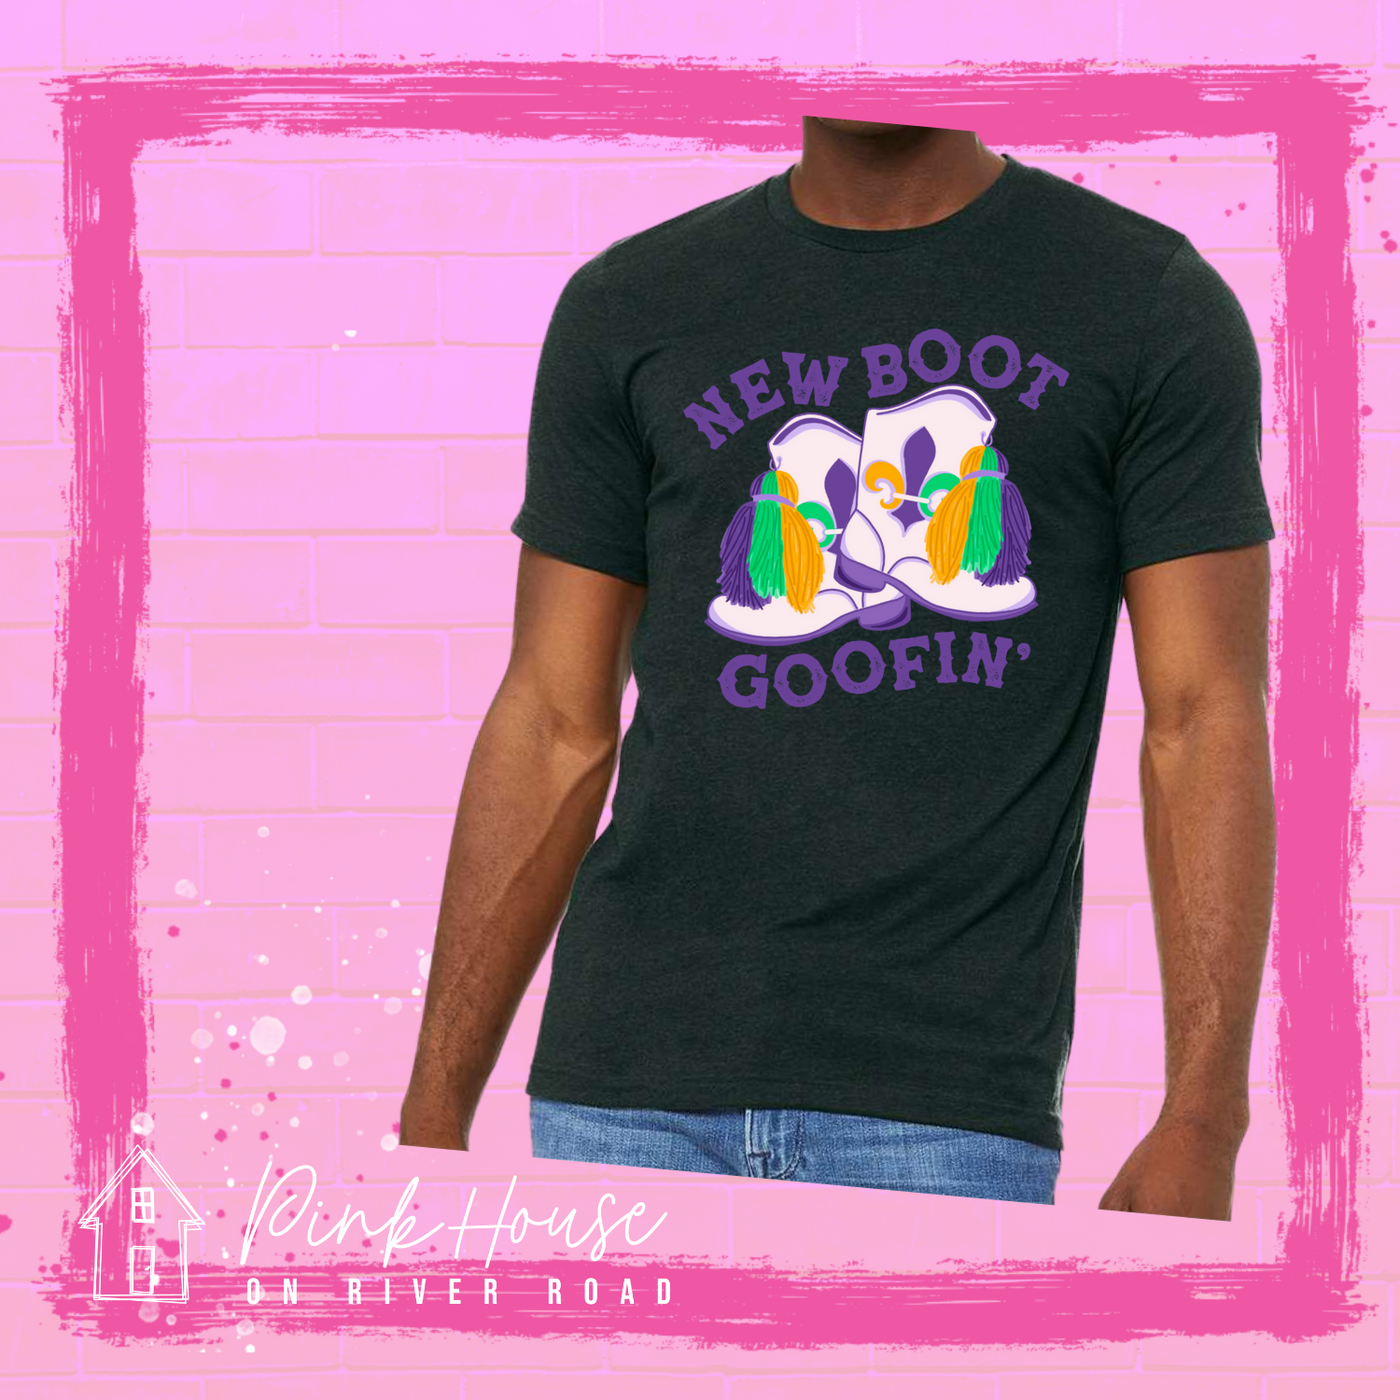 A dark green tee with a graphic. Graphic is of a pair of majorette boots, the boots have a tassel and fleur de lis both in gold, green and purple. the words New Boot are above the boots and the word goofin' is below thee boots the words are in purple.